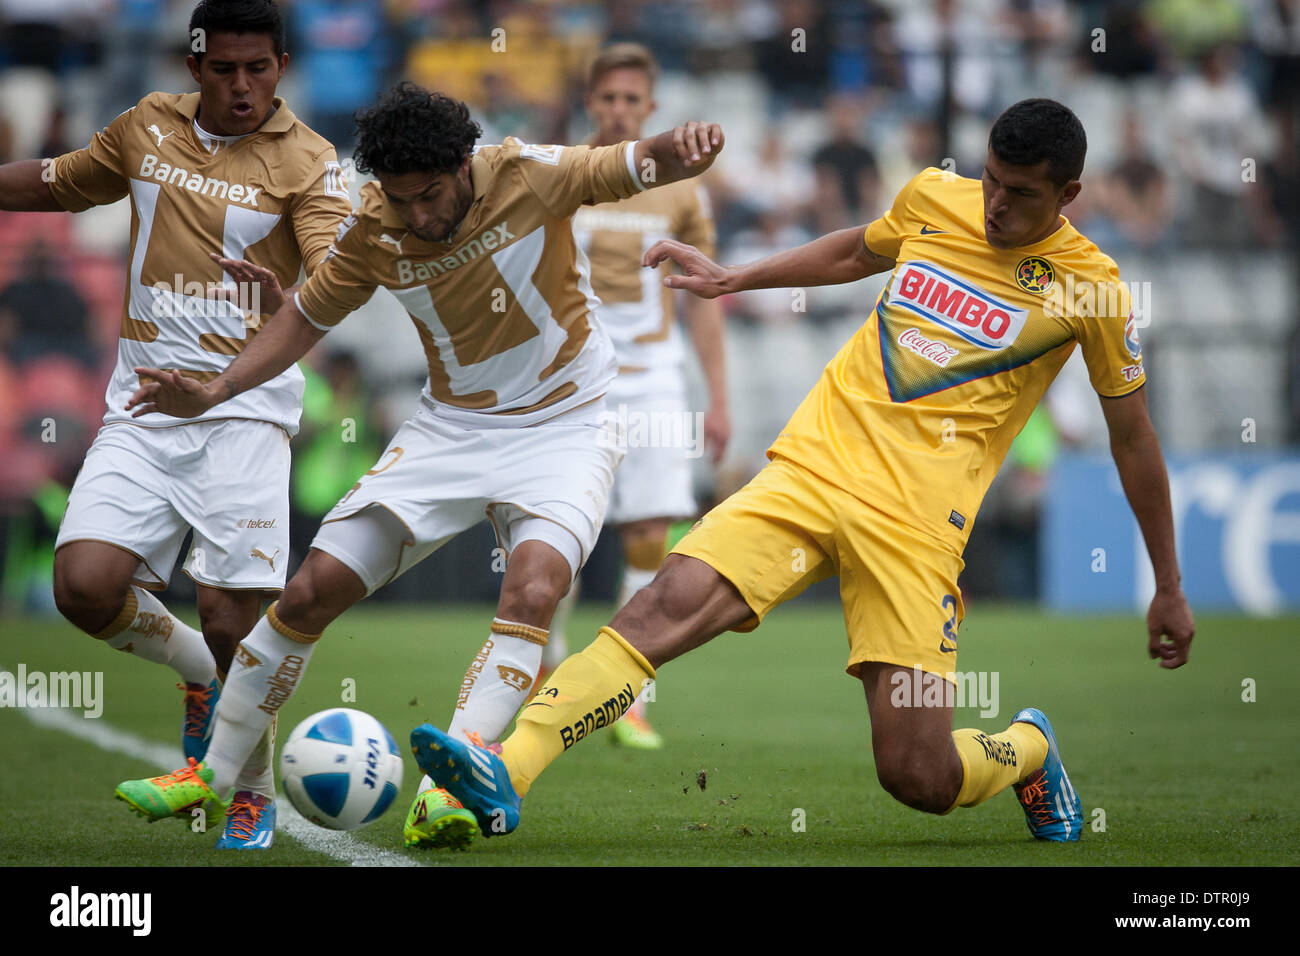 Mexico City, Mexico. 22nd Feb, 2014. Francisco Javier Rodriguez (R) of America vies for the ball with Martin Bravo (C) of Pumas' UNAM during their match of the MX League Closing Tournament at Azteca Stadium in Mexico City, capital of Mexico, on Feb. 22, 2014. © Pedro Mera/Xinhua/Alamy Live News Stock Photo